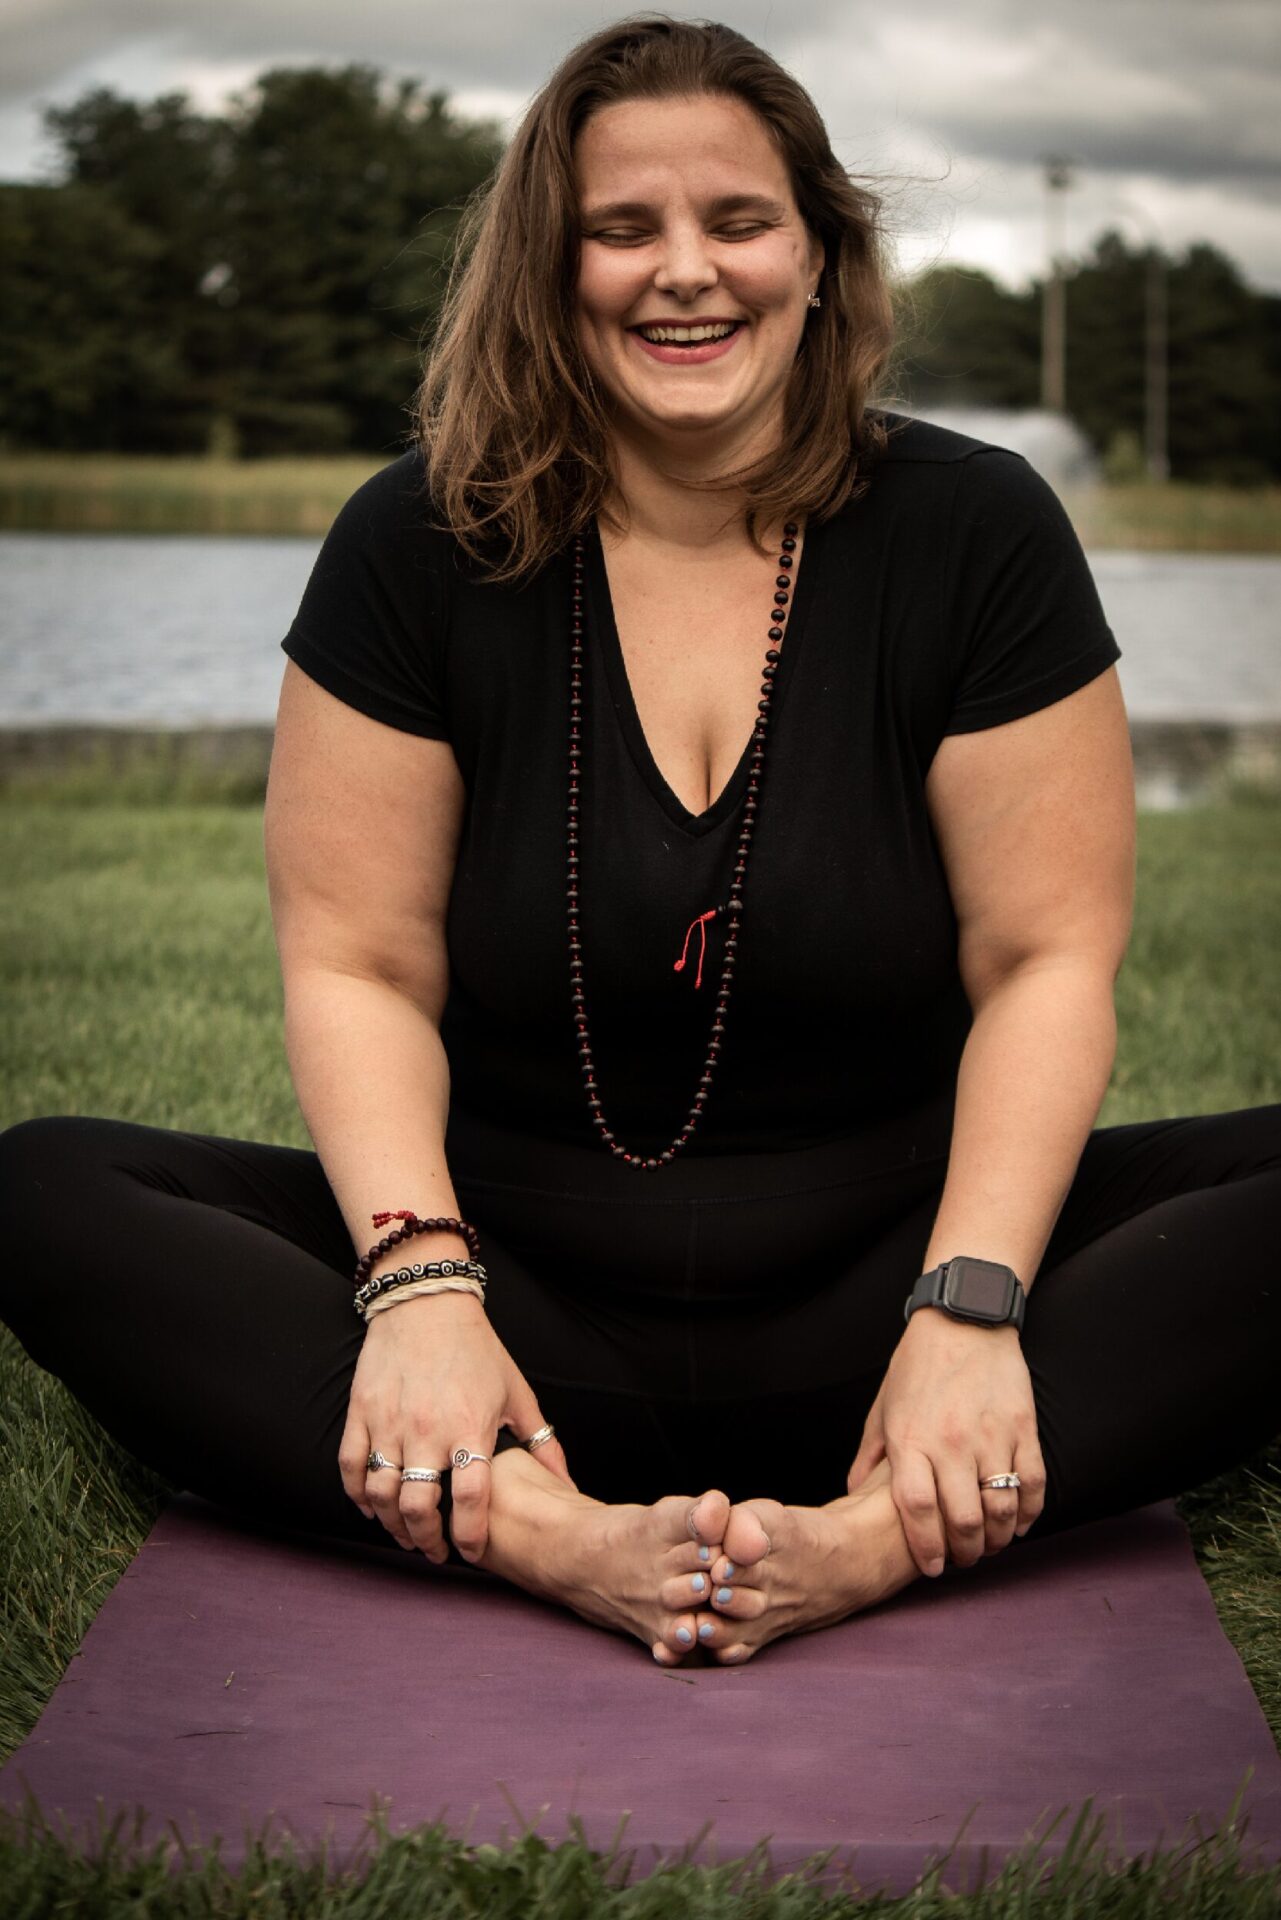 A woman sitting on a yoga mat outside with a black shirt and pants on in a seated pose smiling